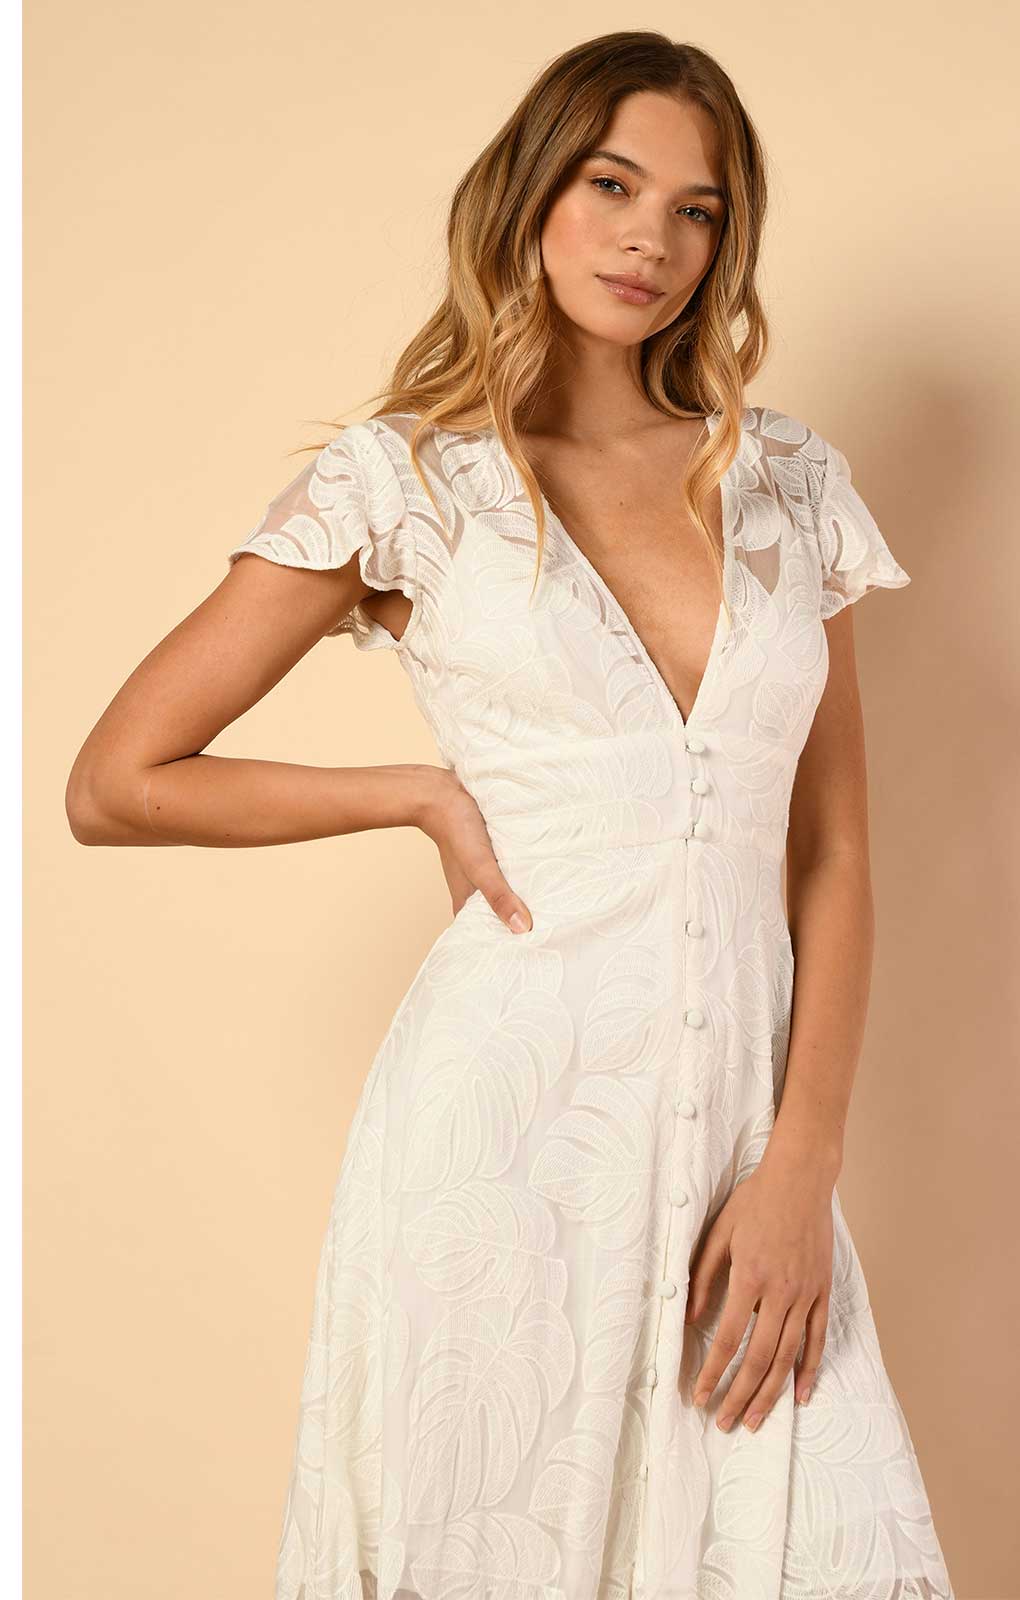 Hutch Nia Dress in White Monsteras Leaf product image